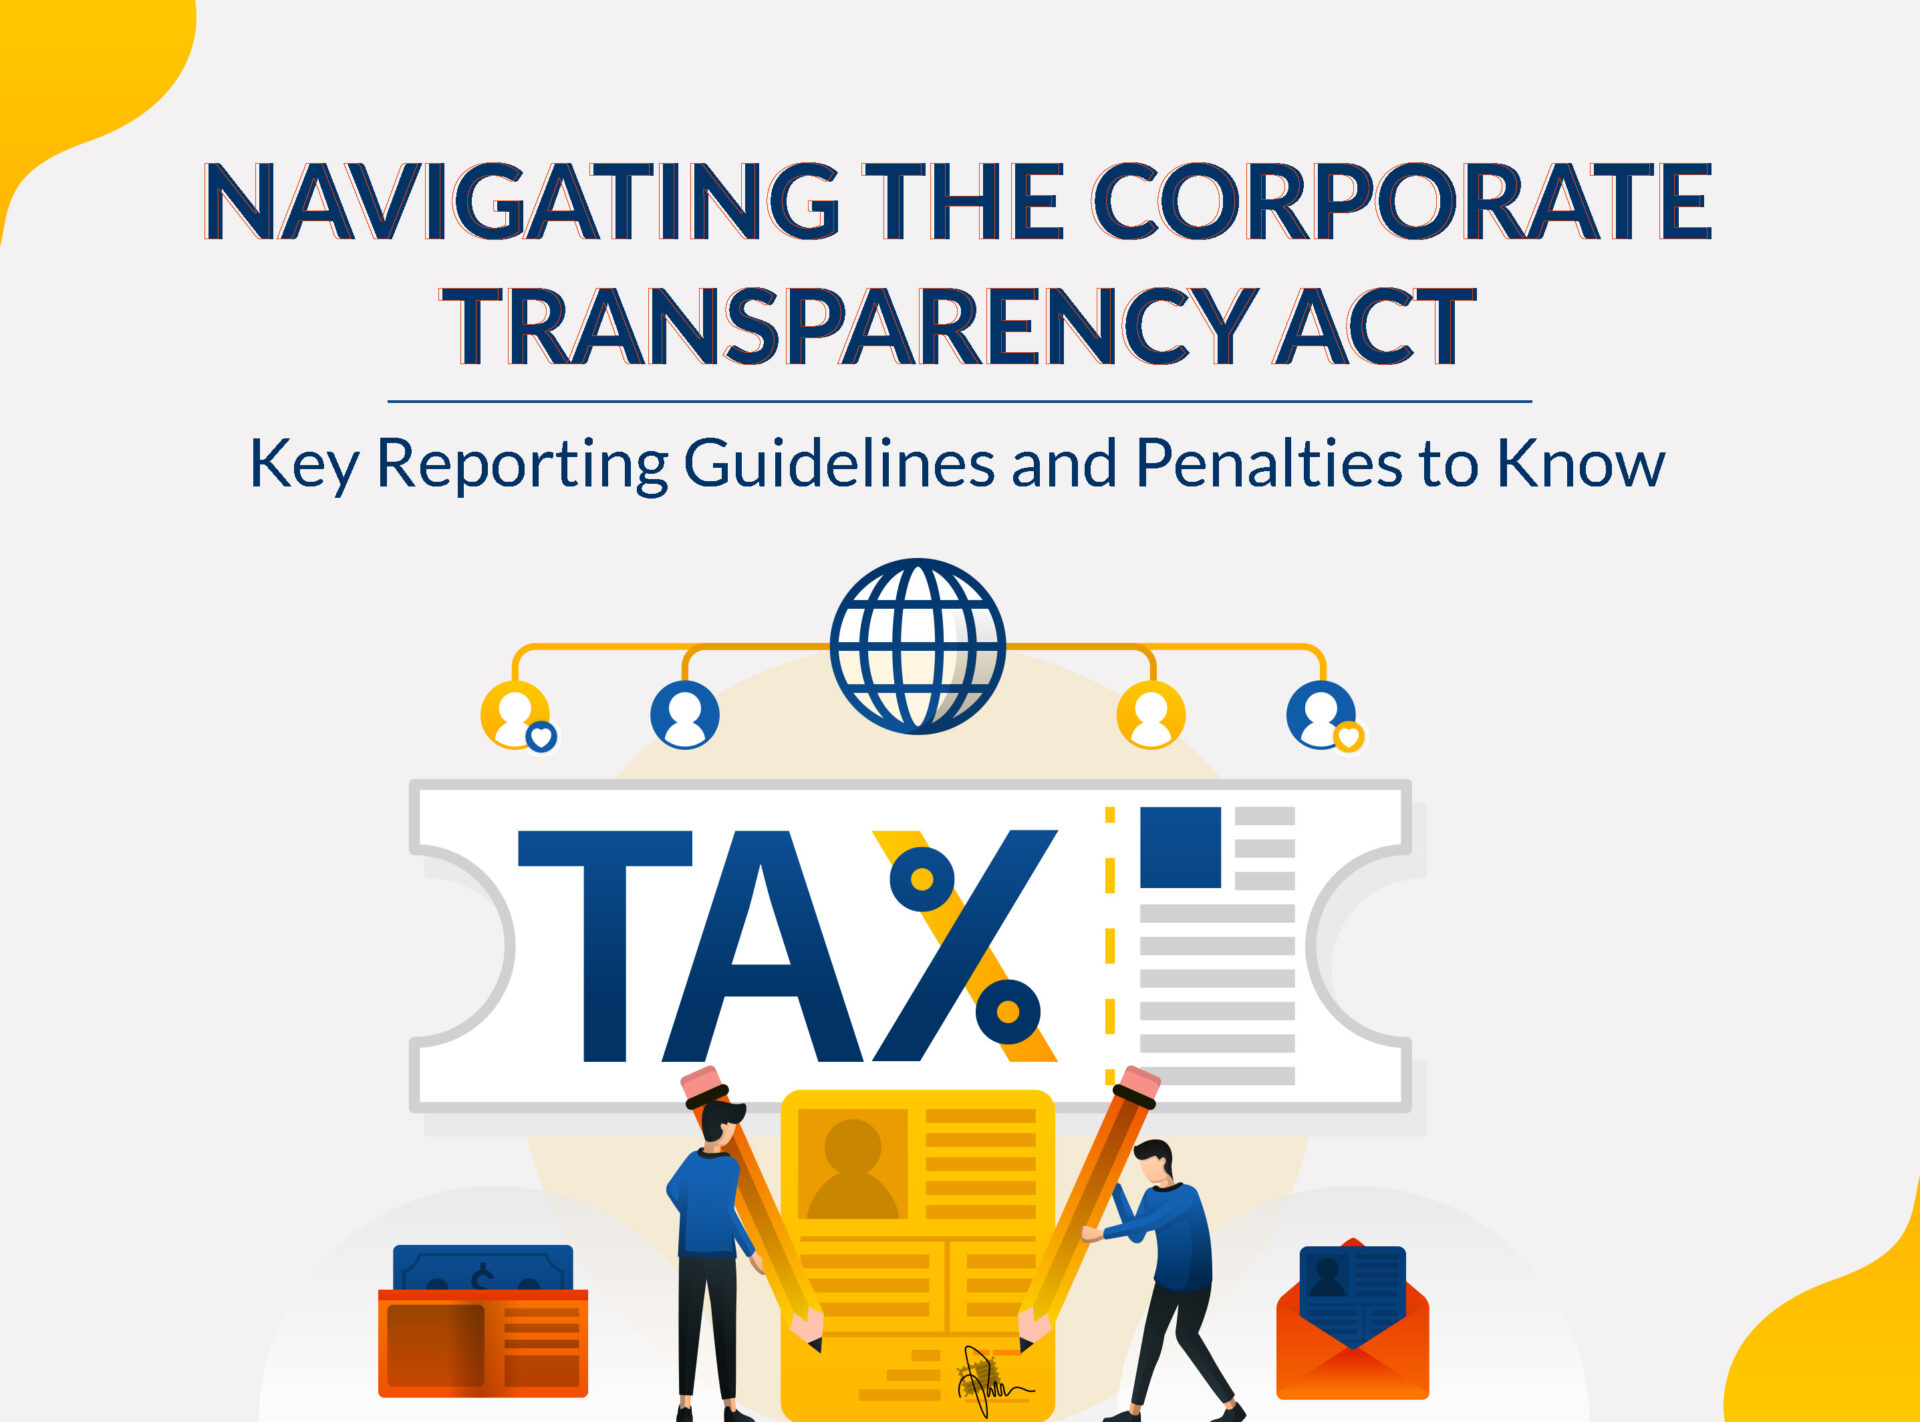 Navigating the Corporate Transparency Act: Key Reporting Guidelines and Penalties to Know